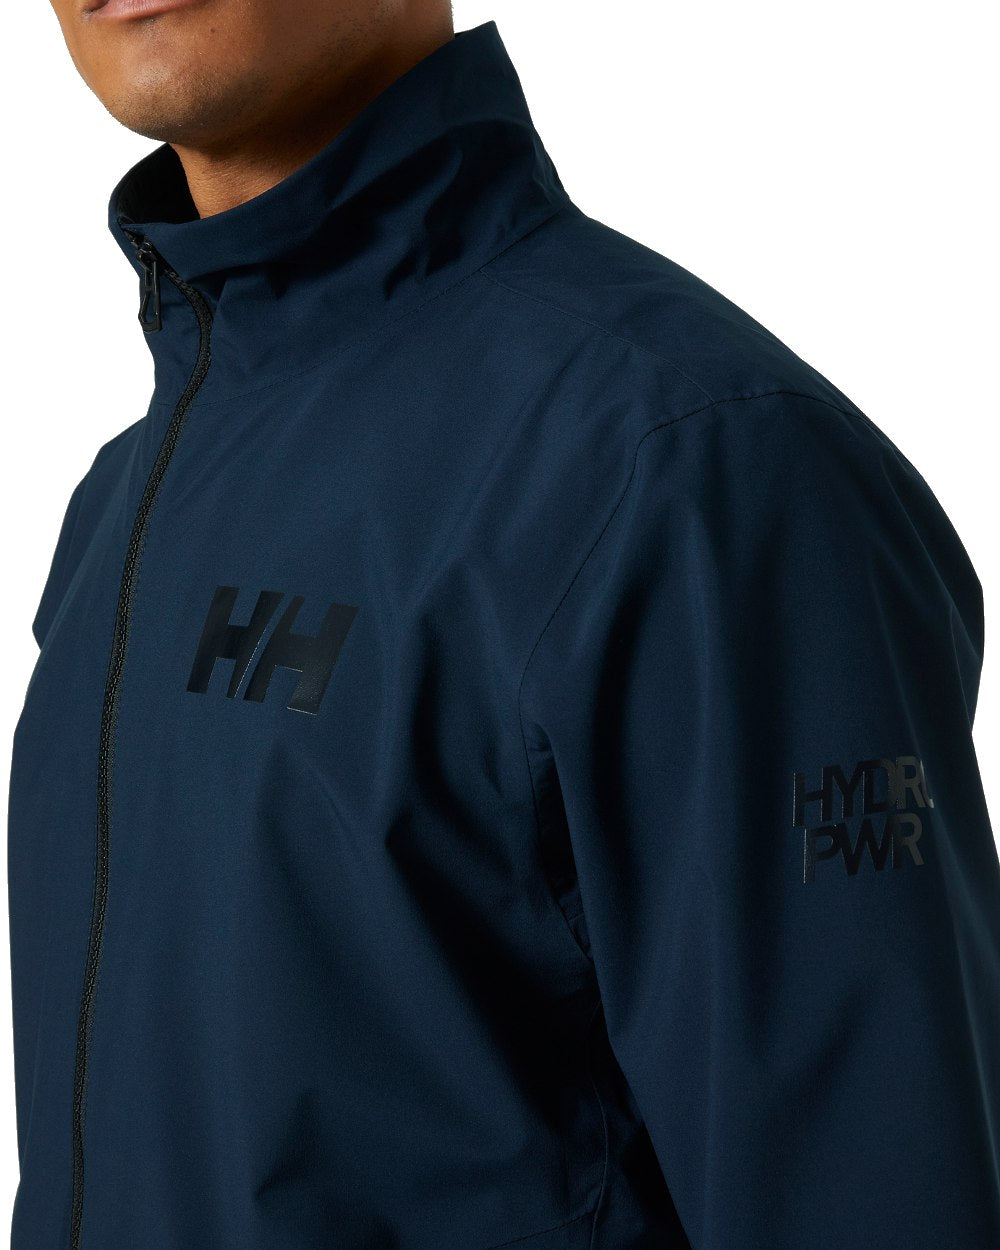 Navy coloured Helly Hansen Mens HP Racing Bomber Sailing Jacket 2.0 on white background 